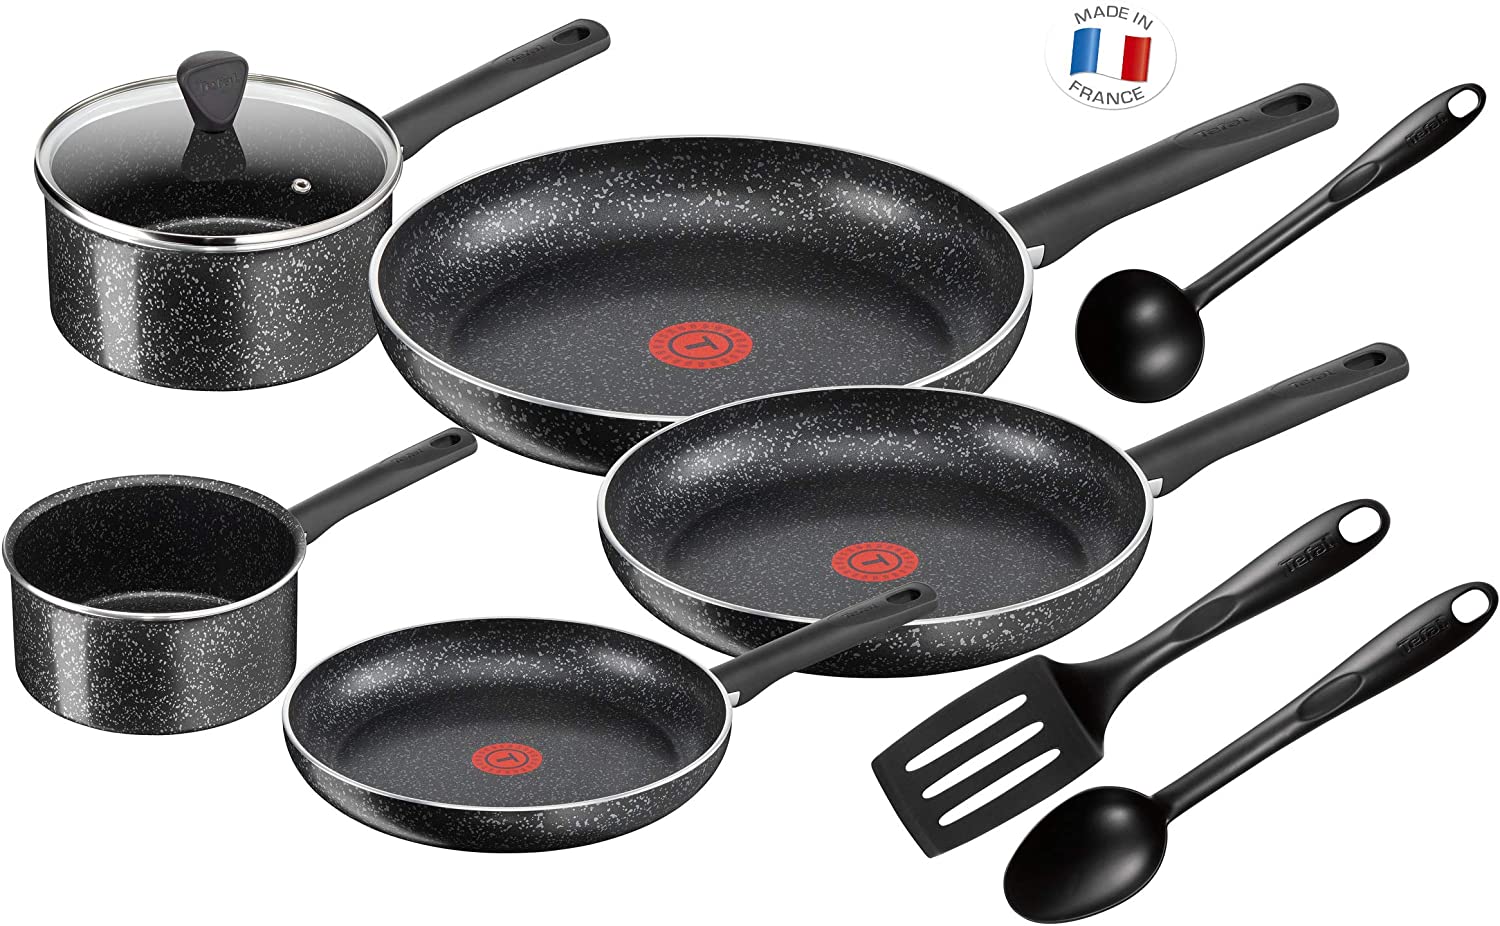 Tefal c2649202 Raw Set 9-Piece Speckled for All Cookers, Induction, Aluminium, Black, 59 x 39 x 28 cm